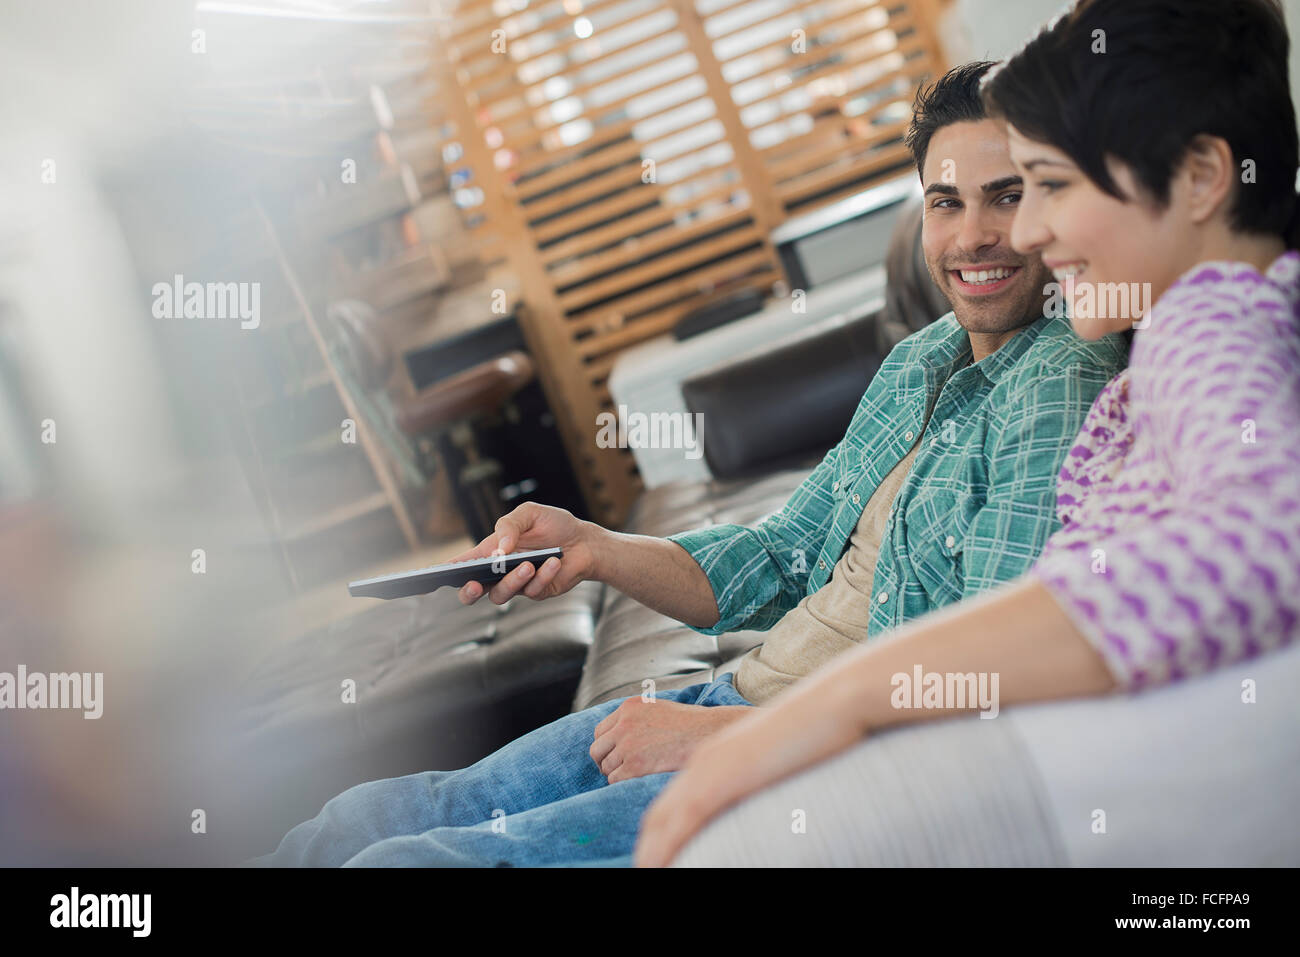 A couple, man and woman sitting on a sofa at home, one holding a remote control device. Stock Photo